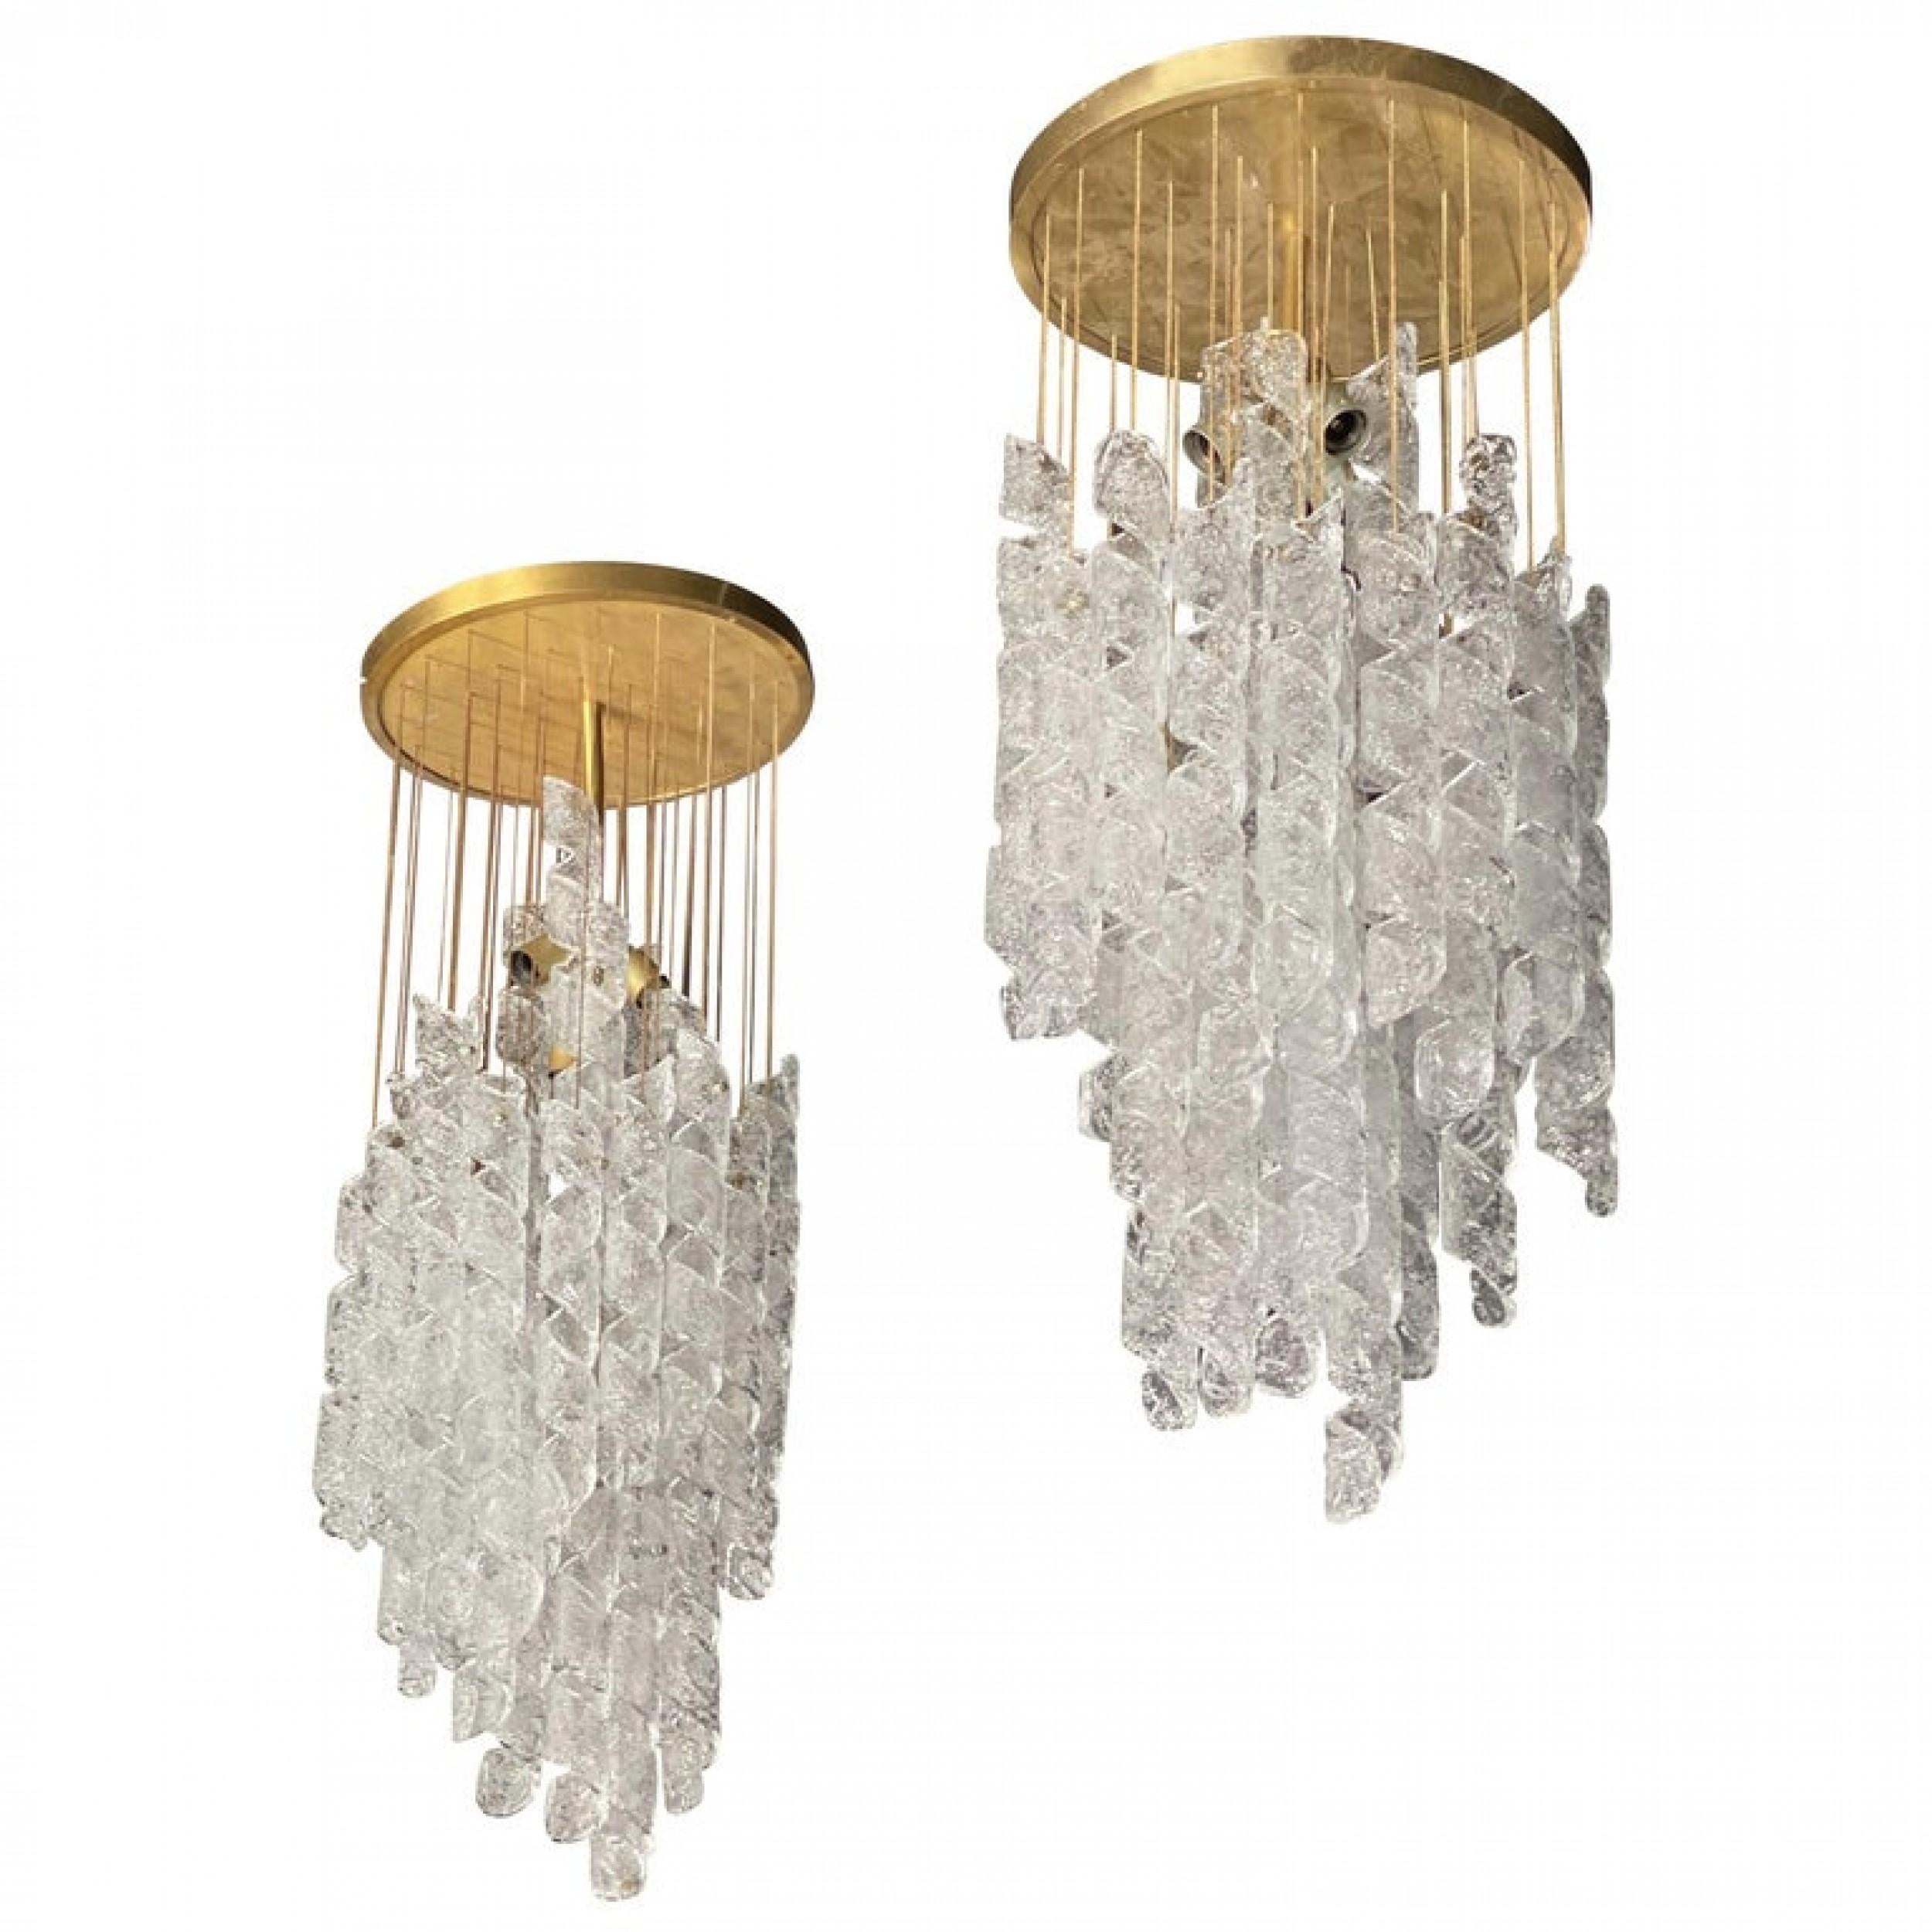 Pair of Italian Modern Hand Blown Glass and Brass Chandeliers, Mazzega For Sale